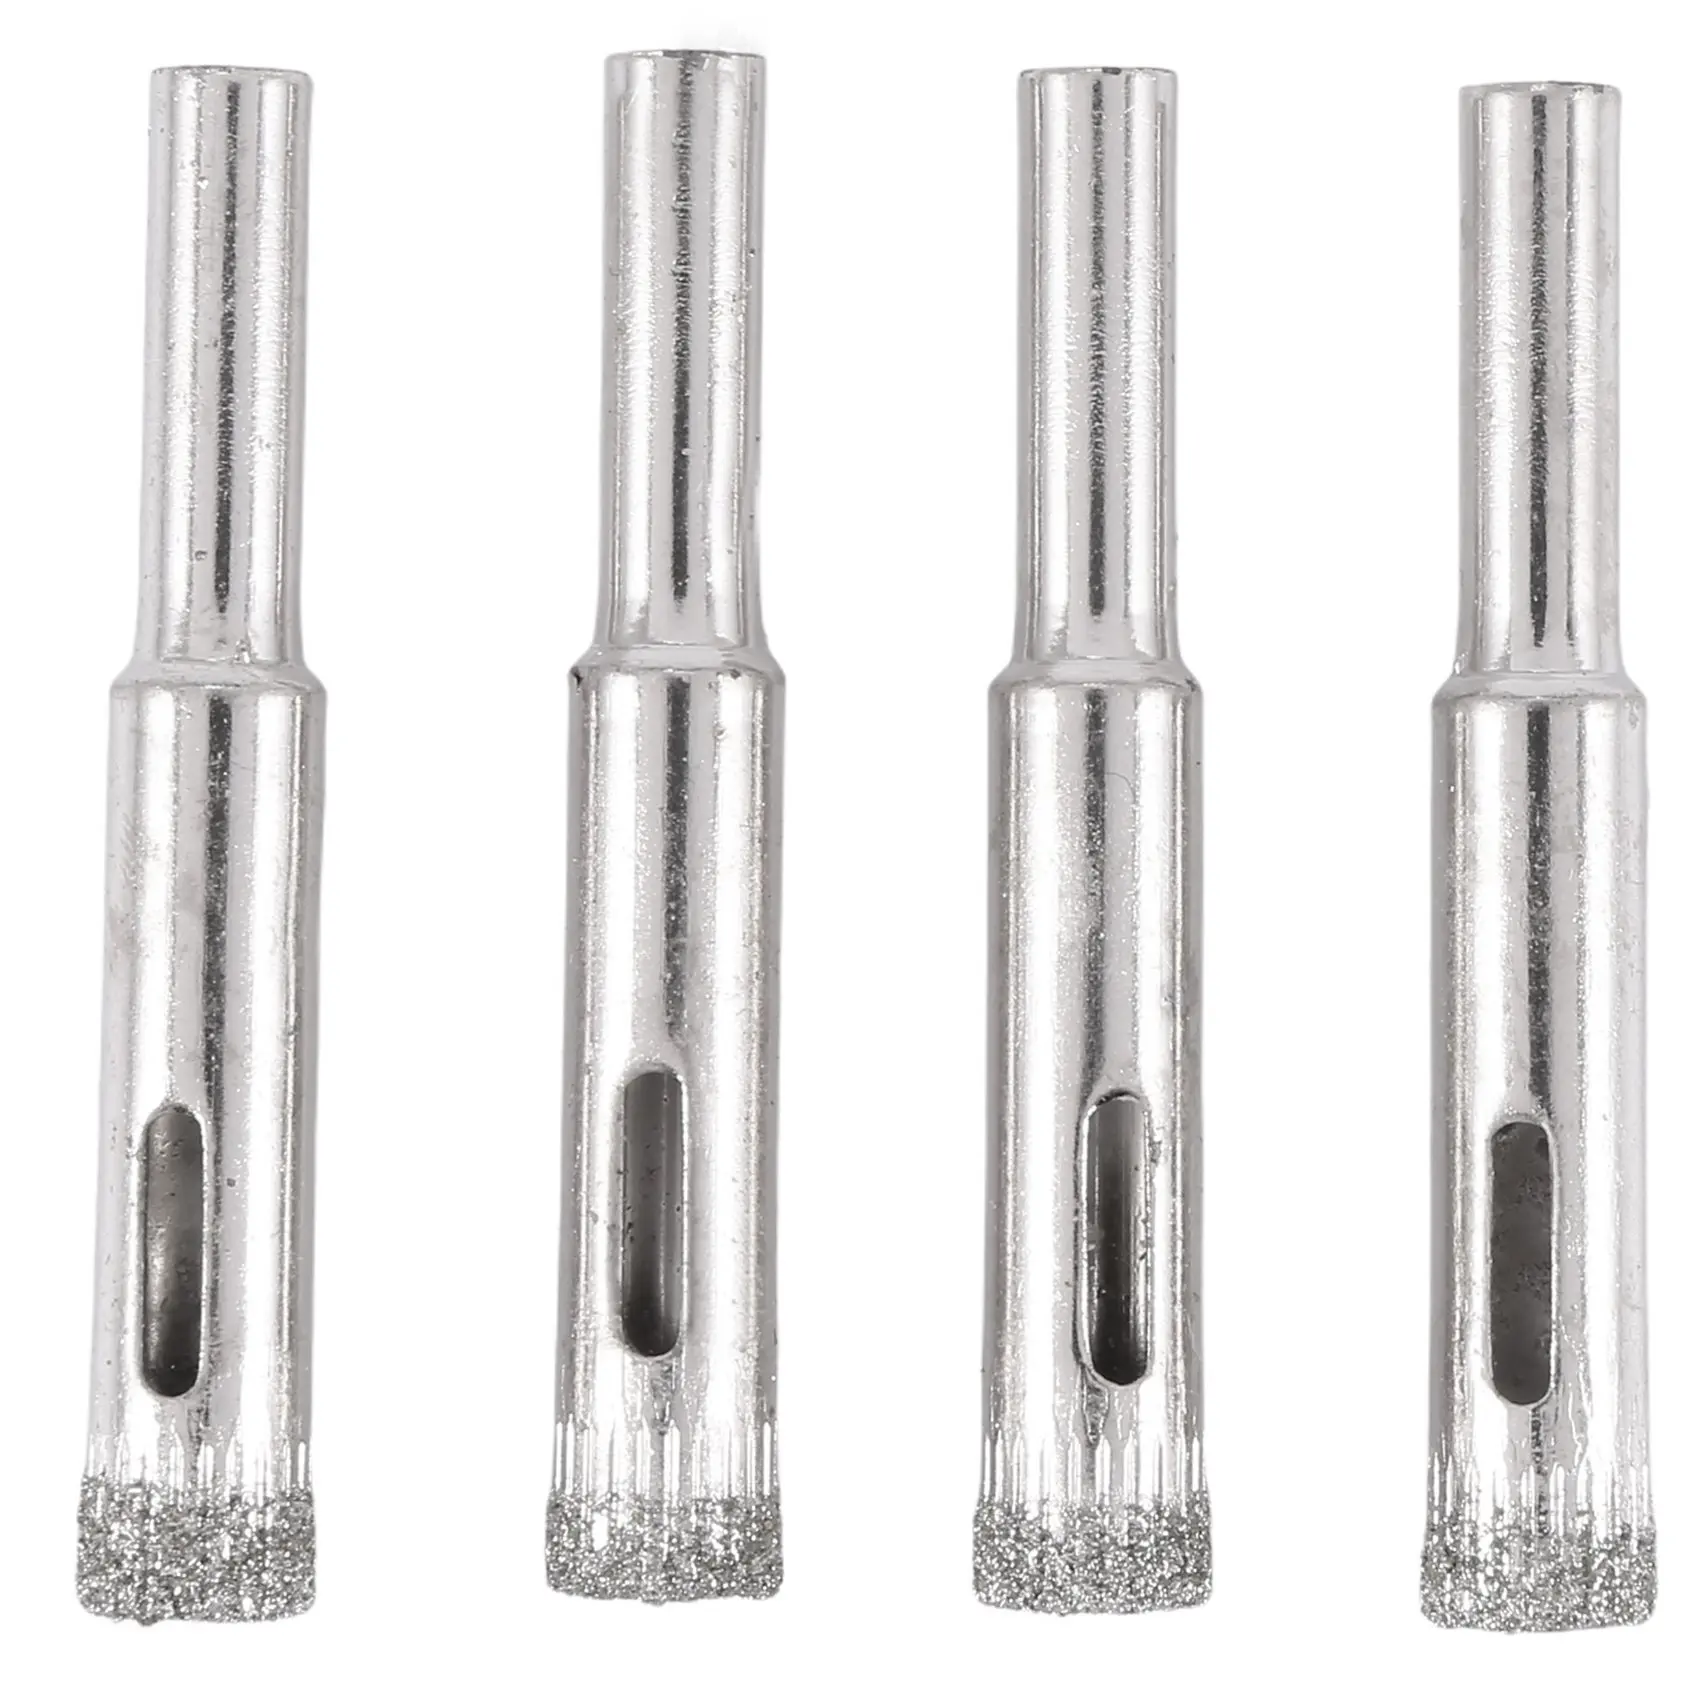 

50 Pcs Diamond Coated Drill Bit for 8 mm Diamond Pointed Hole Saw, for Ceramic Tiles, Glass, Kitchen Ceramics, Marble